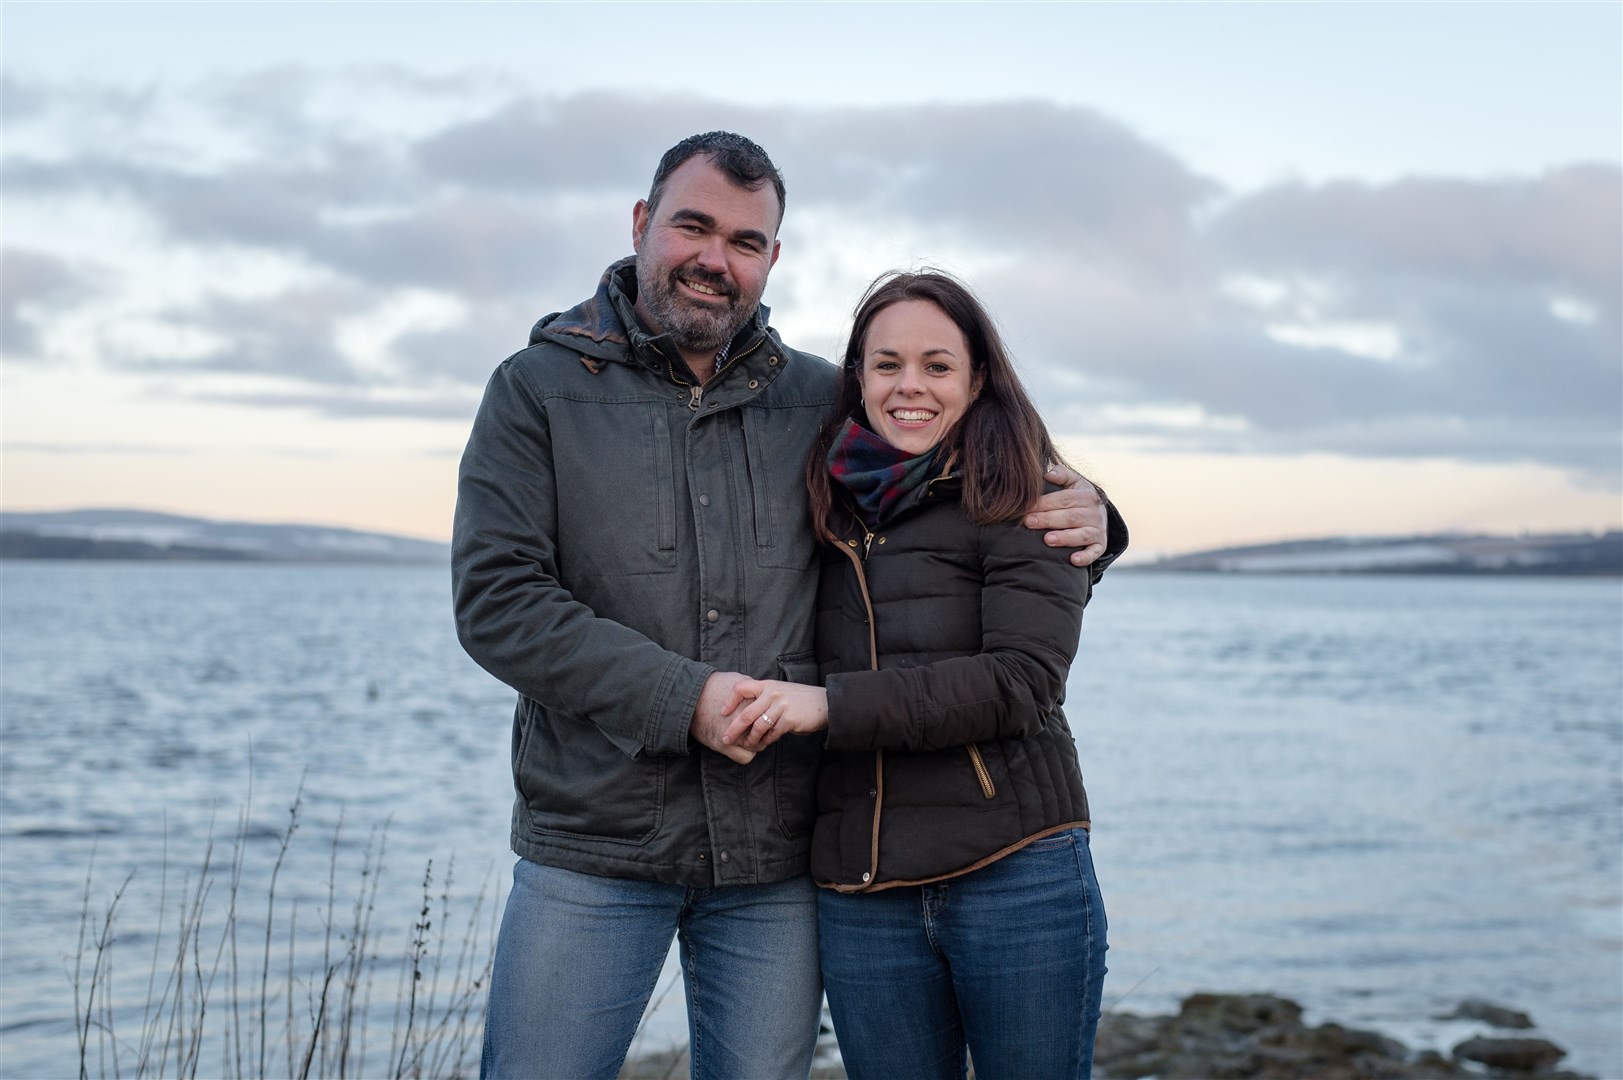 Kate Forbes MSP with her fiancé Ali Maclennan who popped the question while they were out on a snowy walk in the Highlands.